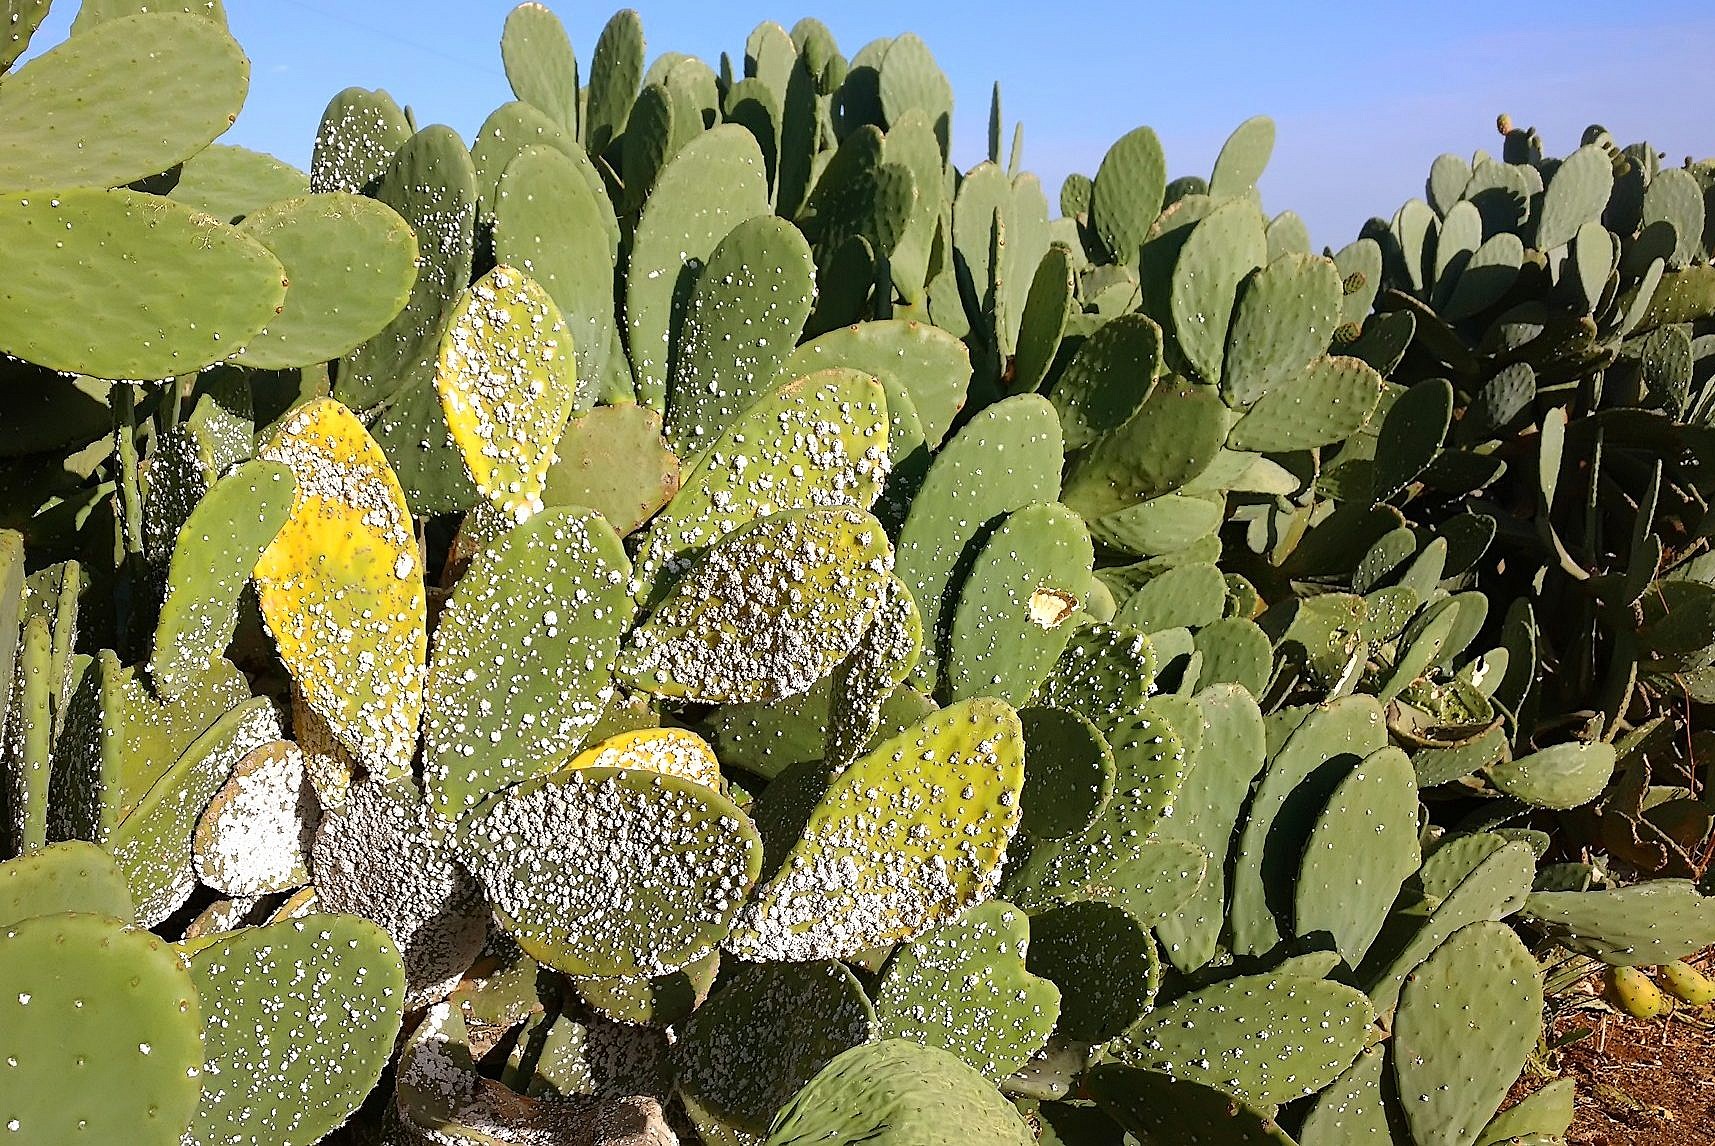 Israeli Scientists Fight To Save Iconic Sabra Prickly Pear From